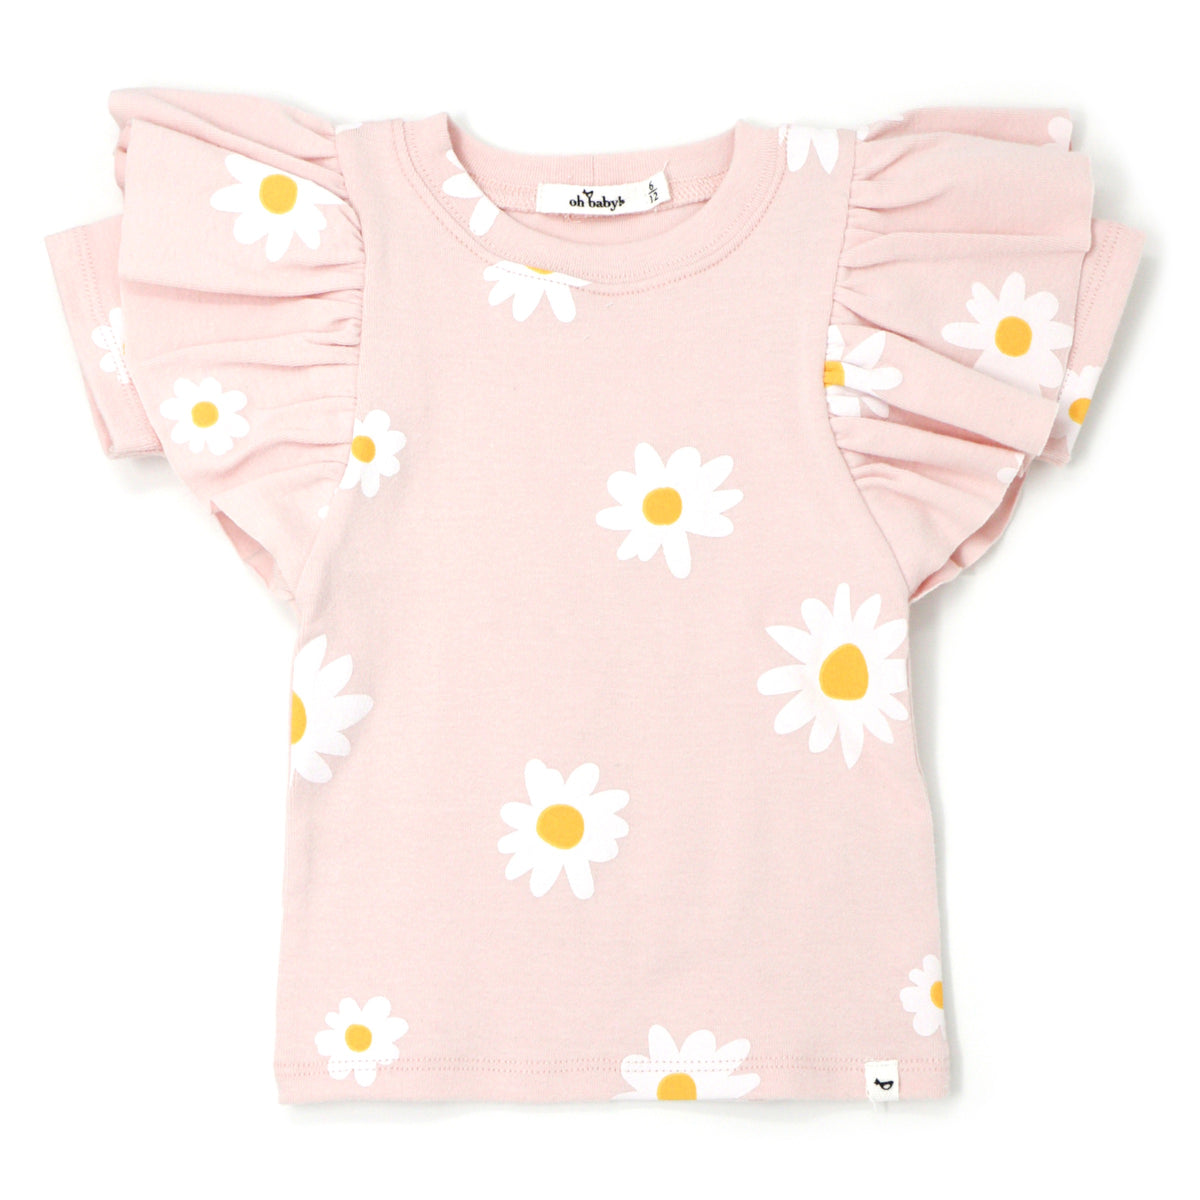 oh baby! Butterfly Sleeve Short Sleeve Tee - White Daisies - Pale Pink